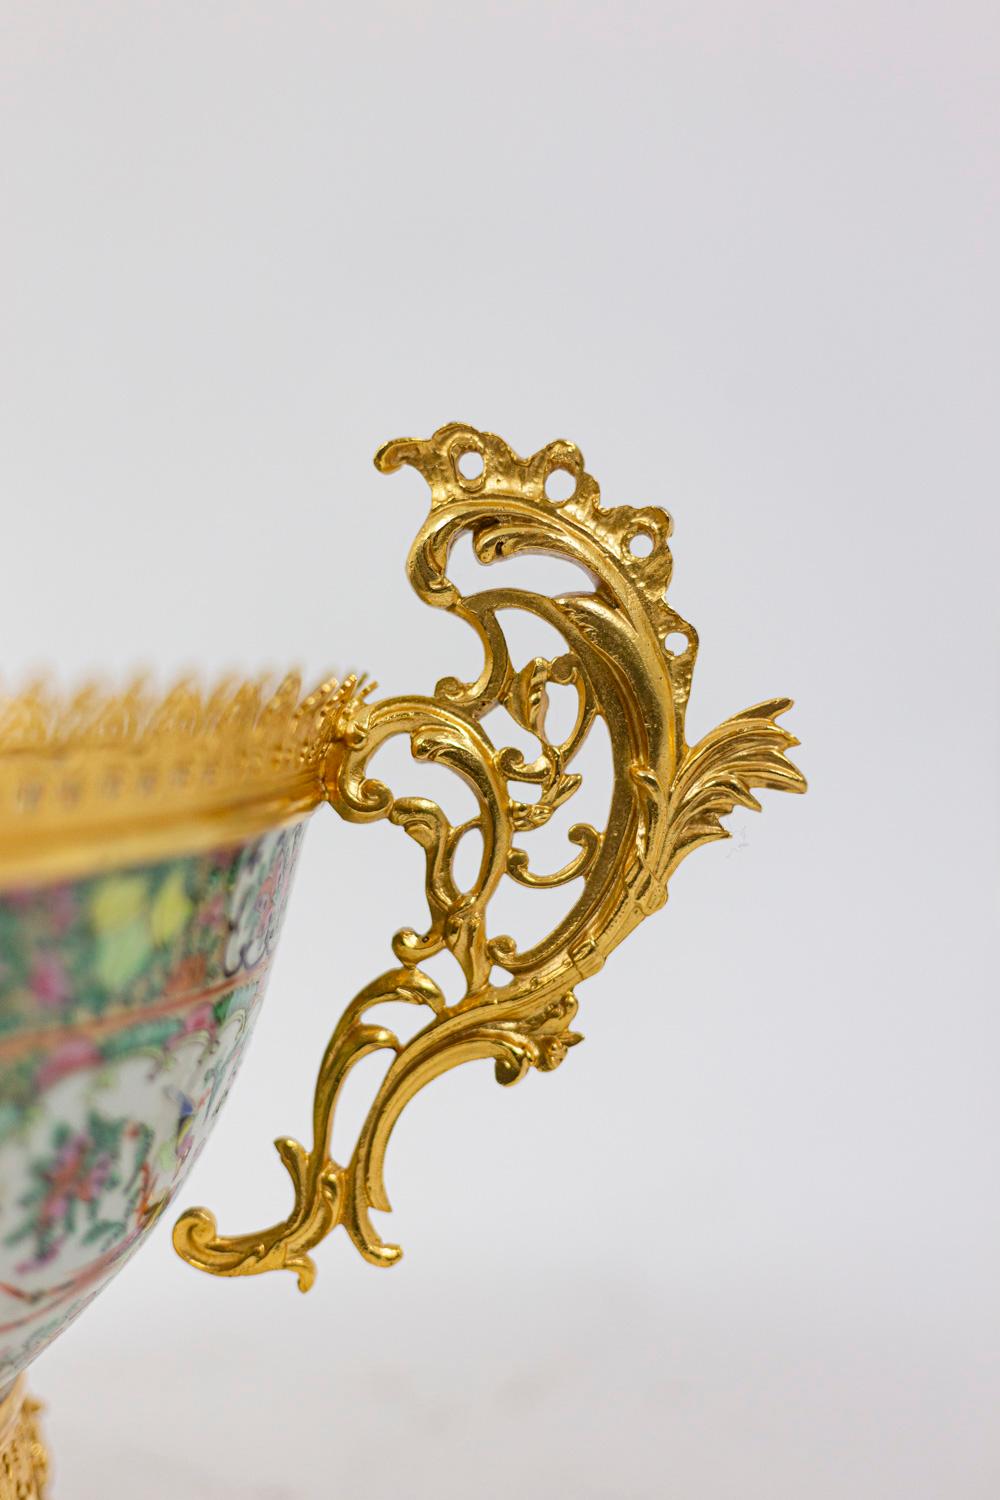 Cup in Canton Porcelain and Gilt Bronze, circa 1880 For Sale 1